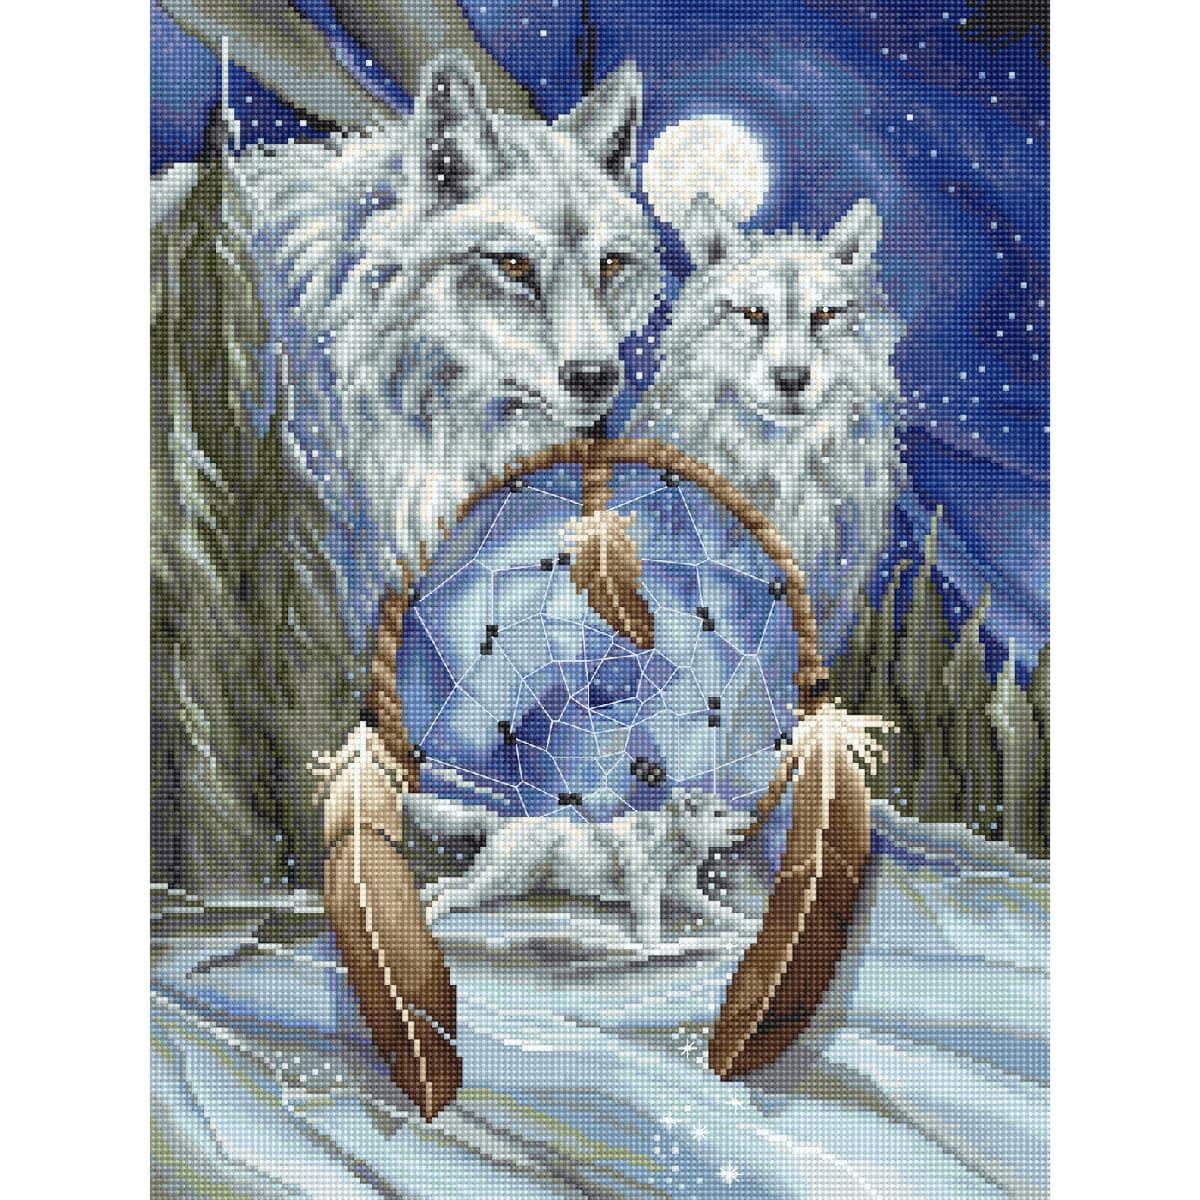 A detailed, pixelated illustration shows two wolves with...